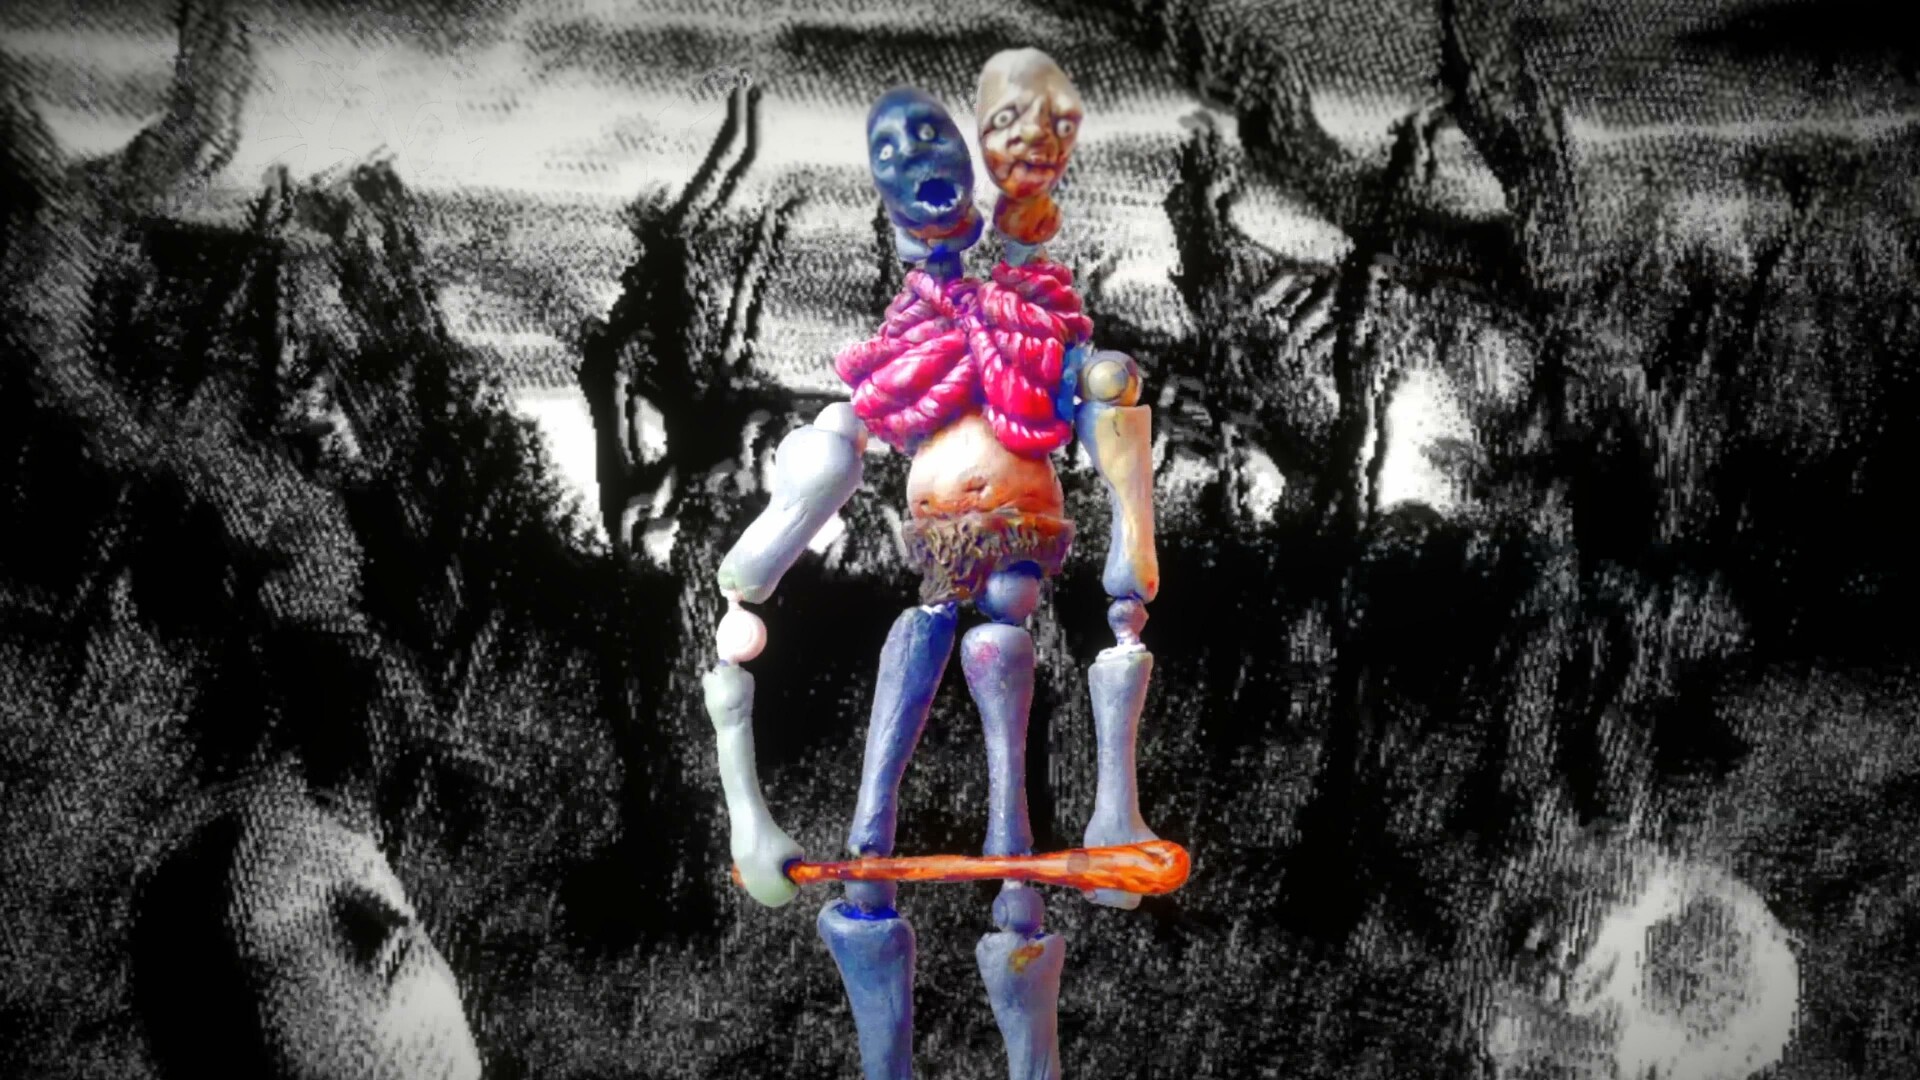  I had my weekend turned on its head by this stop motion-animated pagan fever dream of a game 